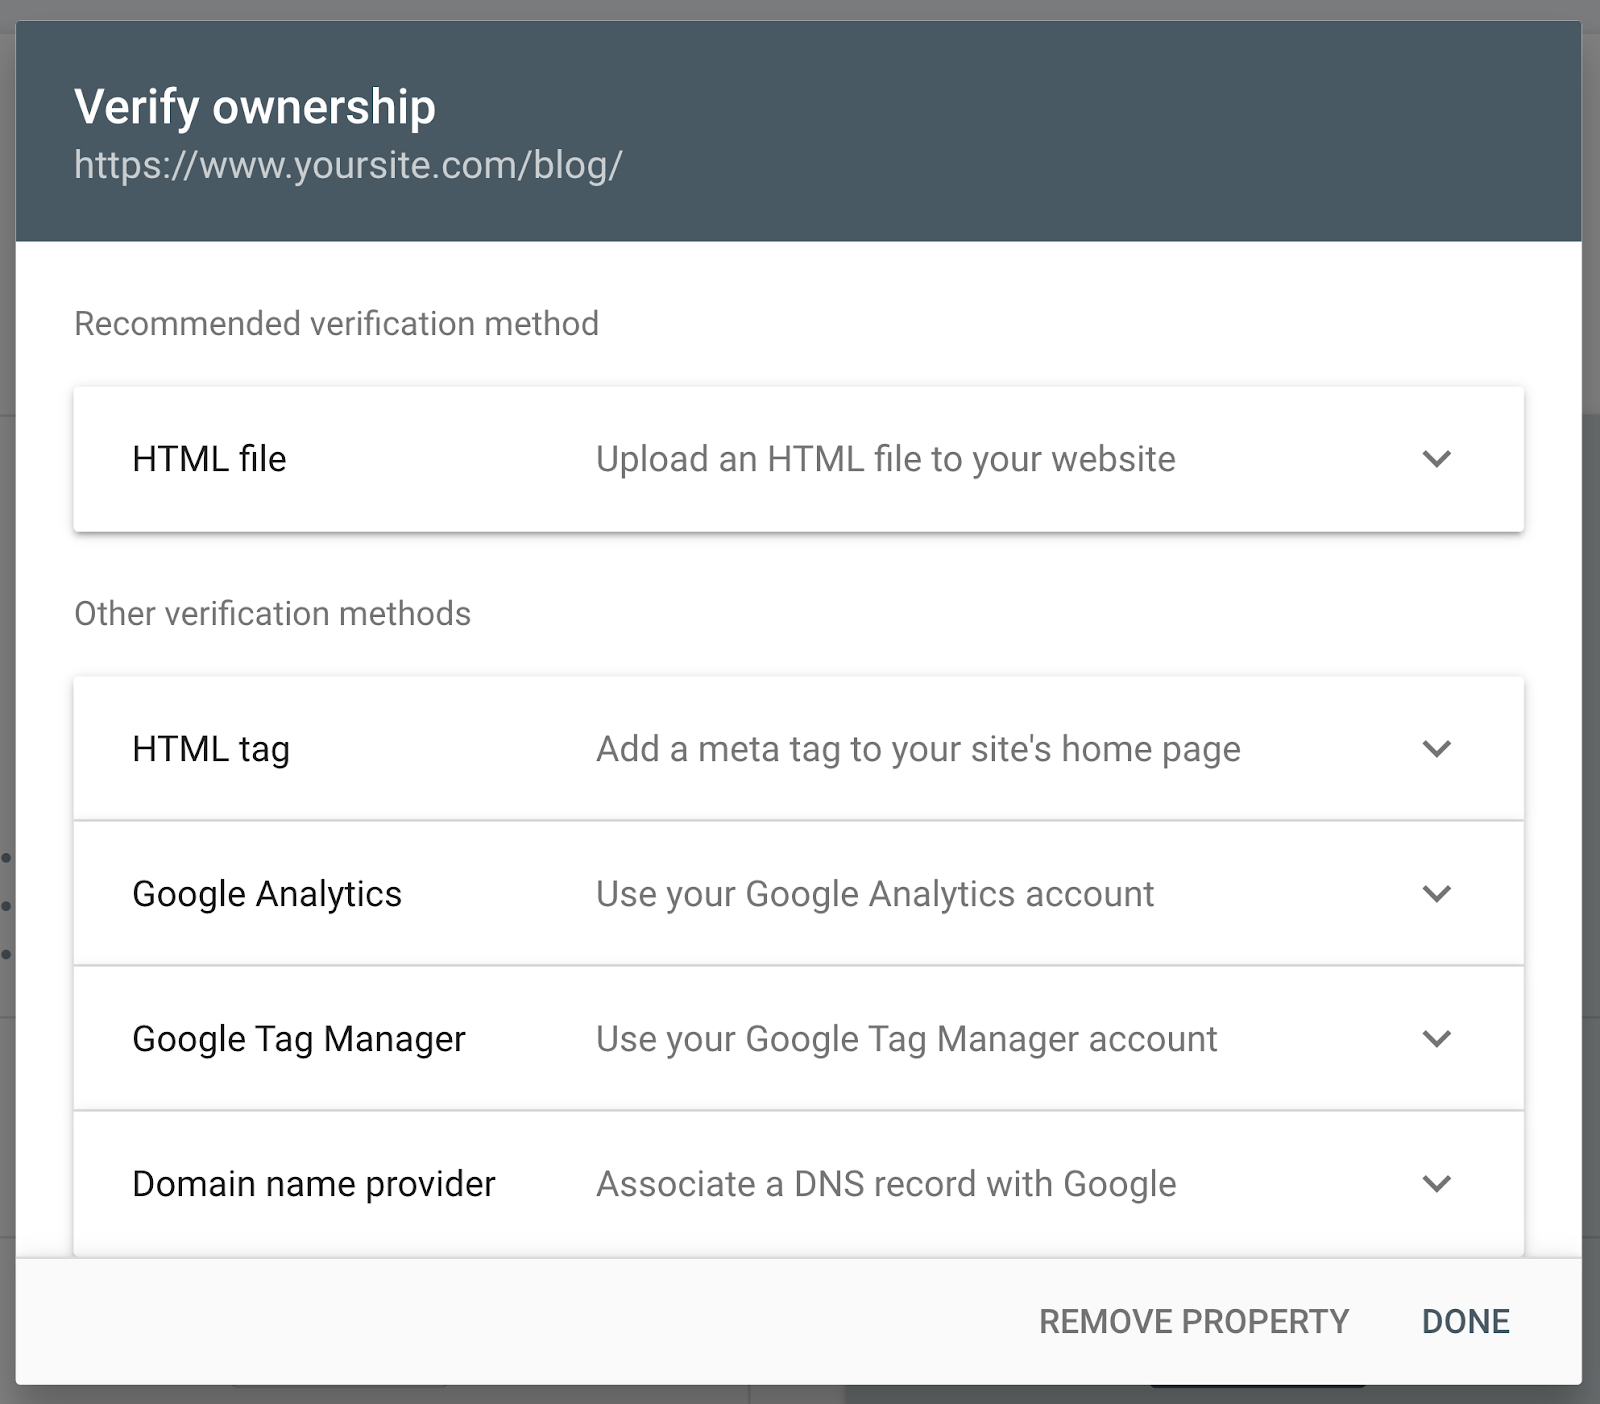 "Verify ownership" page in Google Search Console